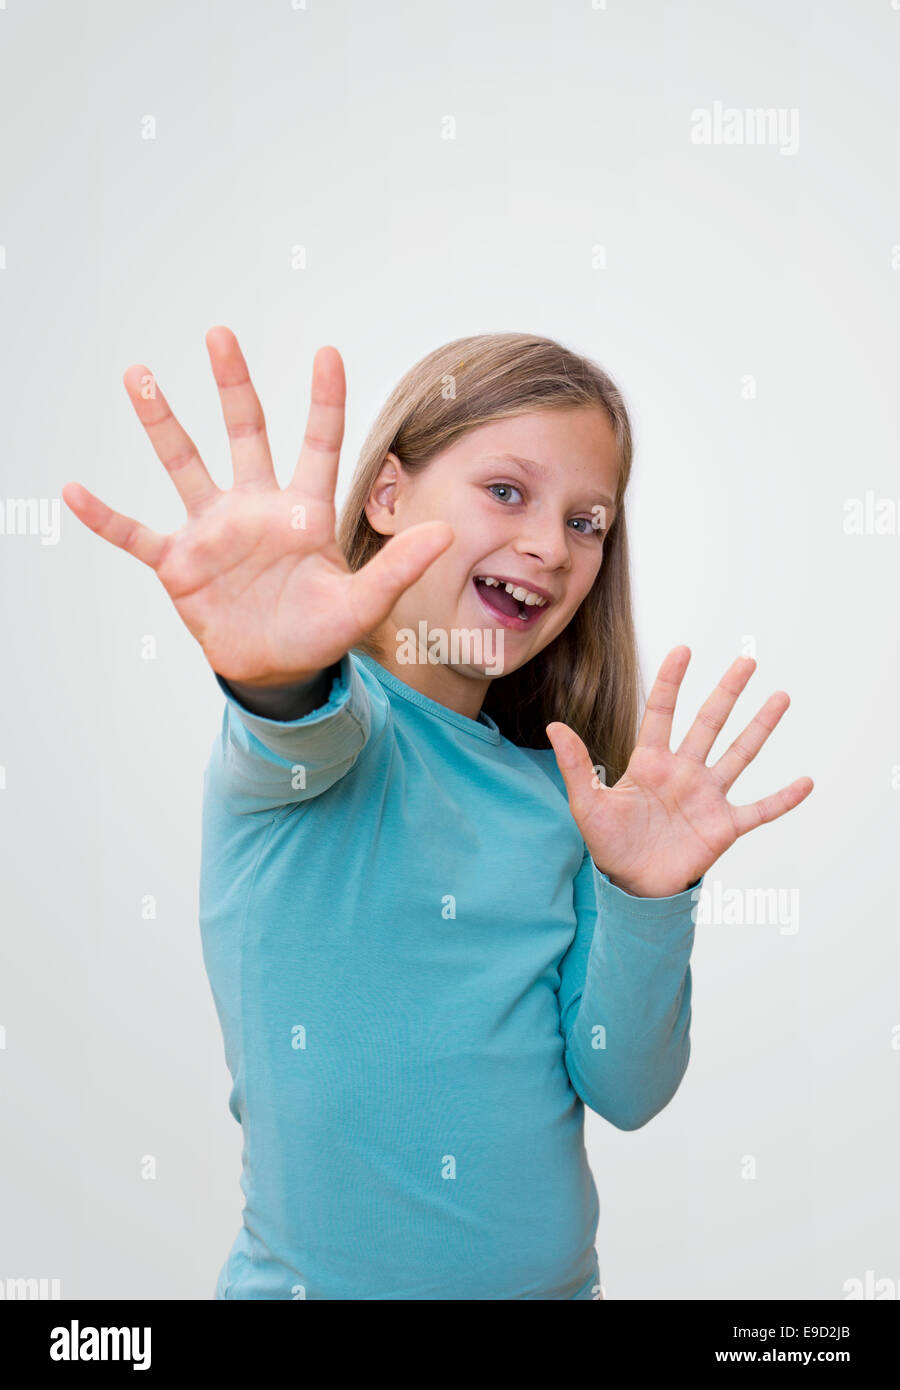 Little girl with long hair shows her ten fingers Stock Photo